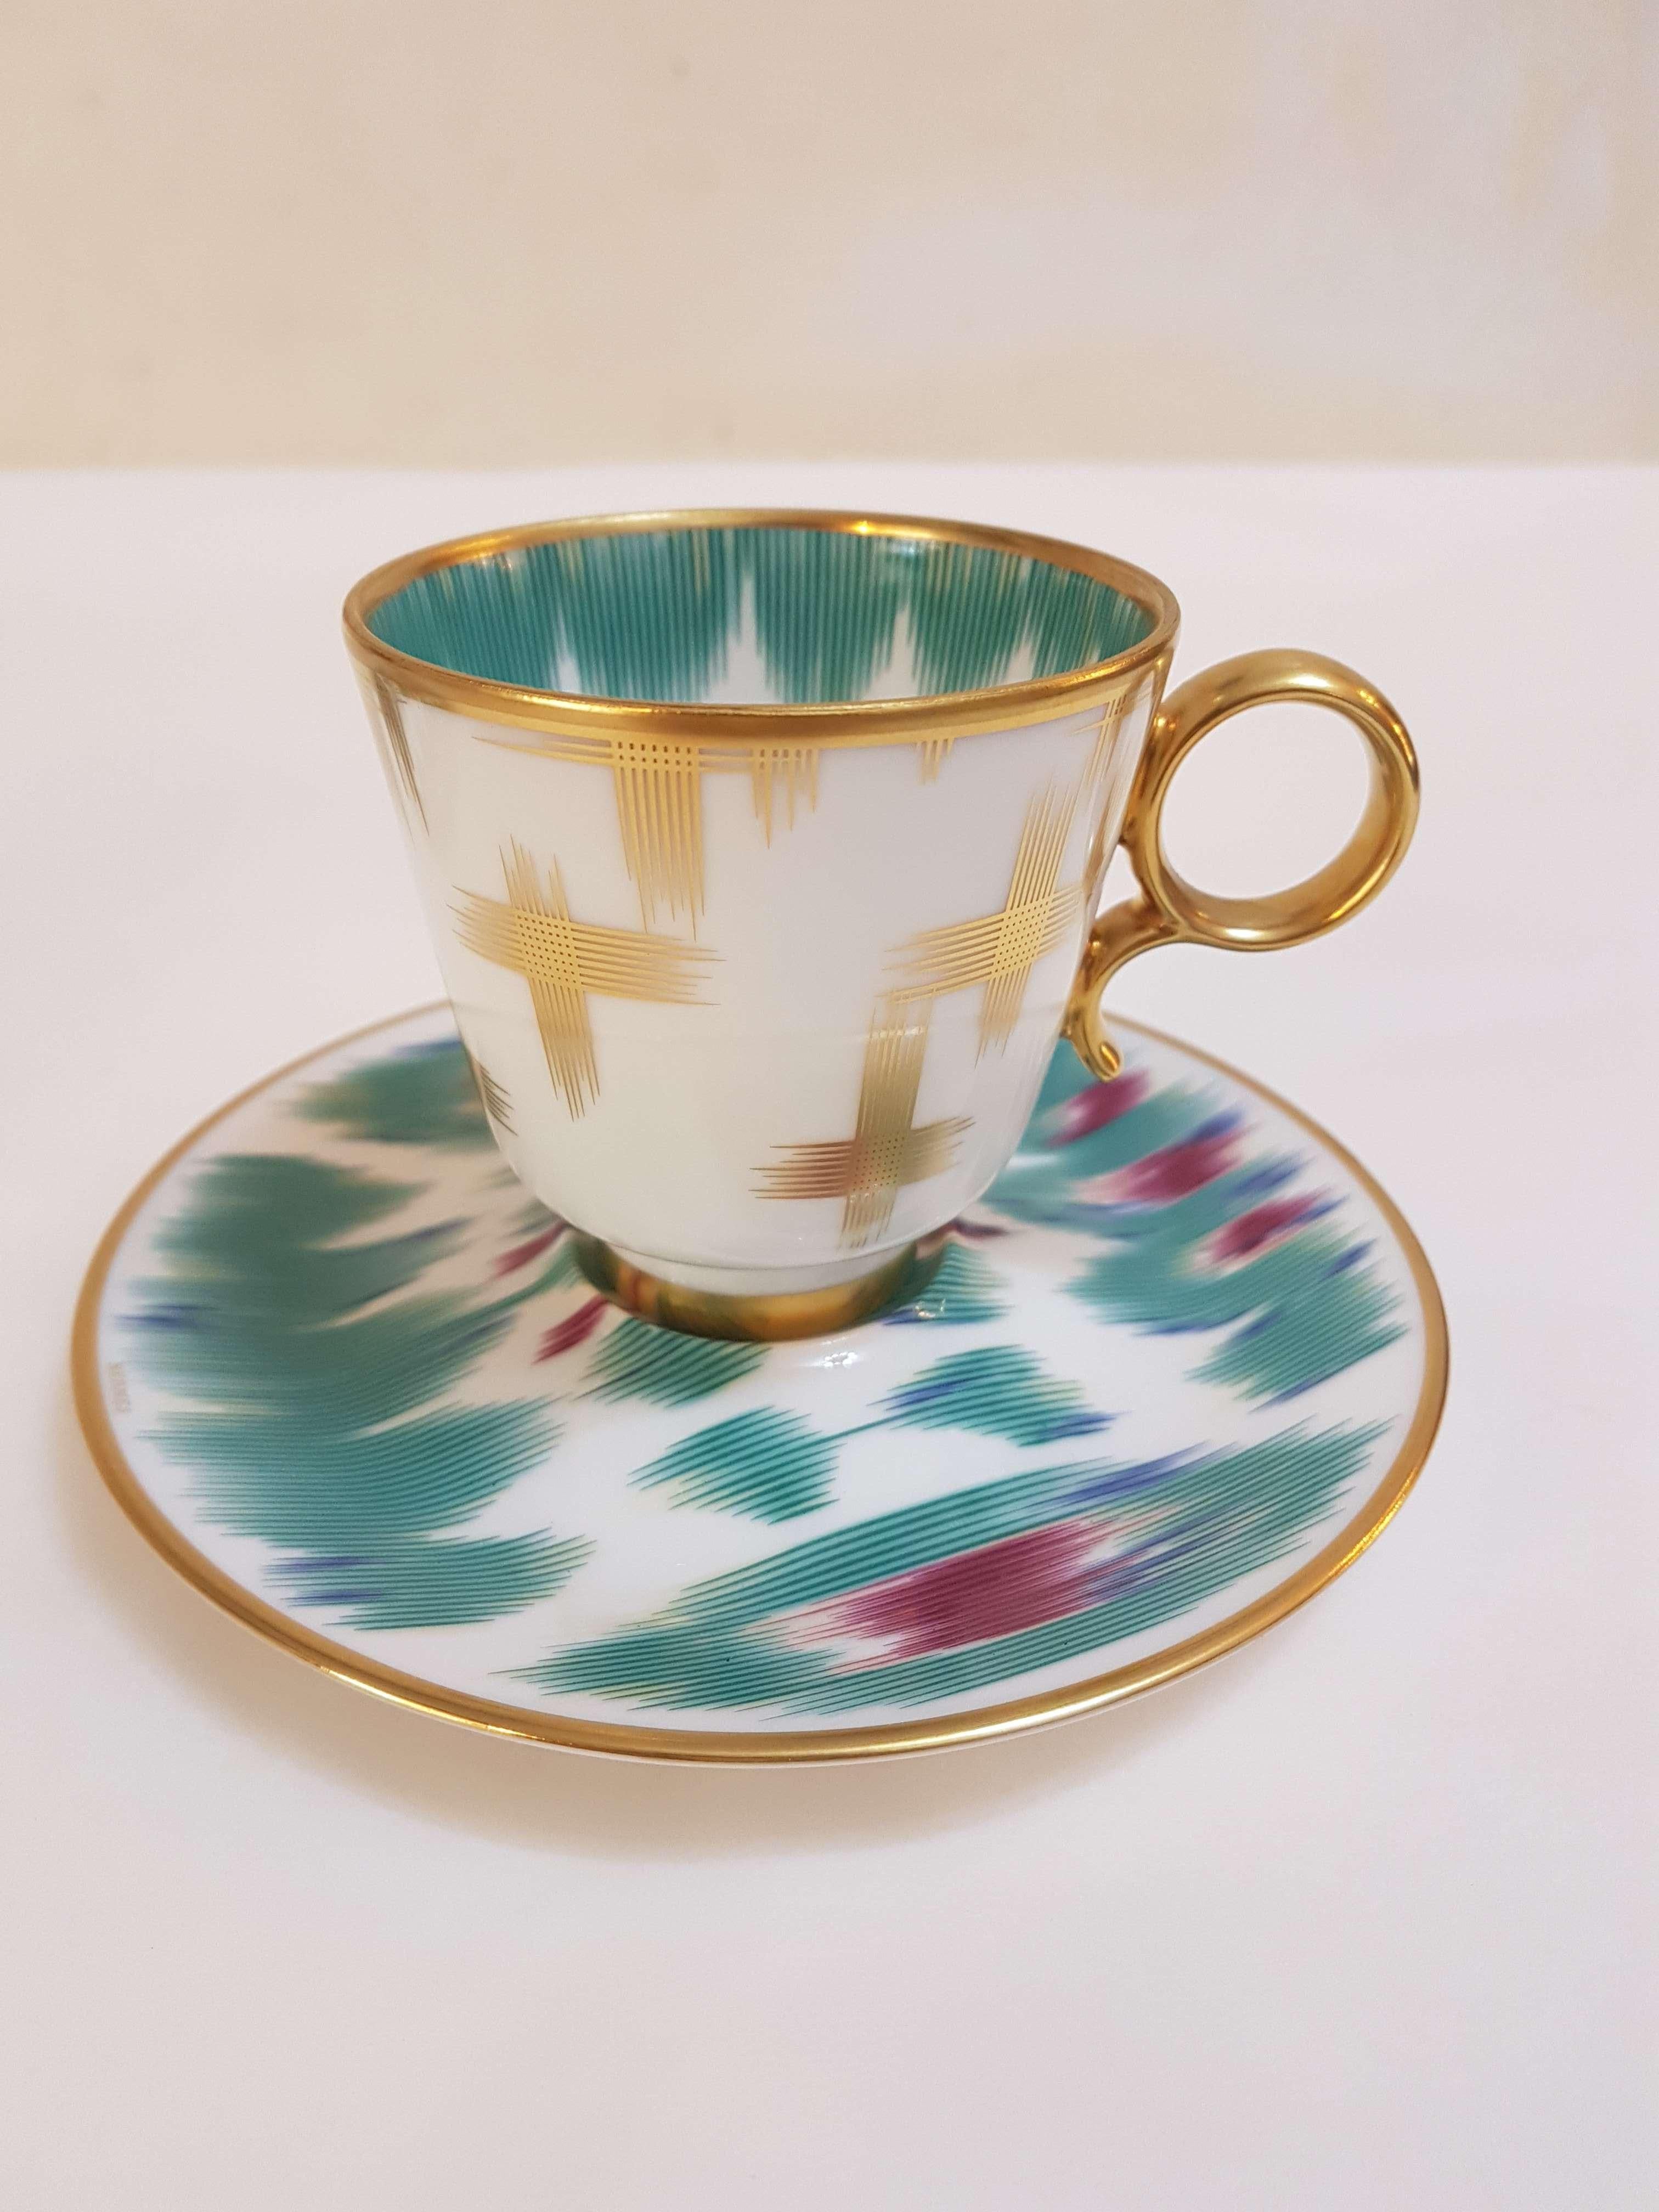 An Hermès porcelain set of two coffee cups and saucers, 